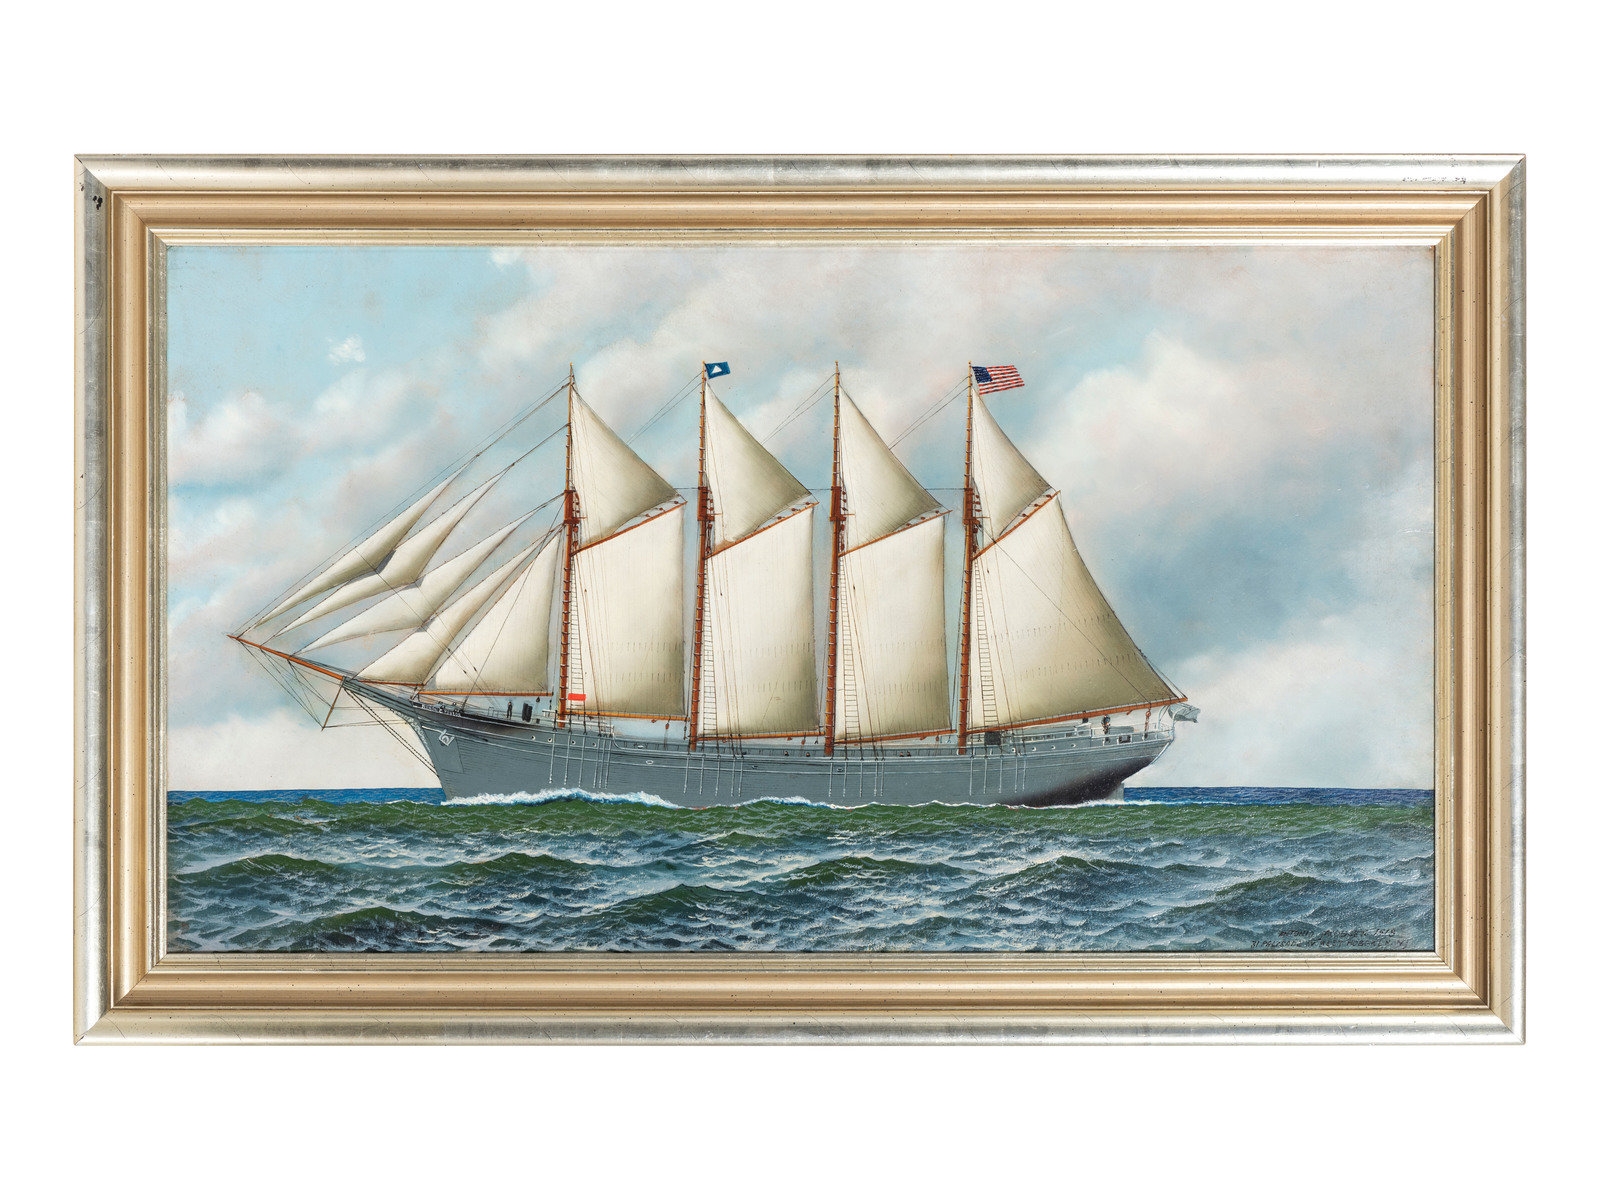 File:Antonio Jacobsen - The clipper Young America under full sail